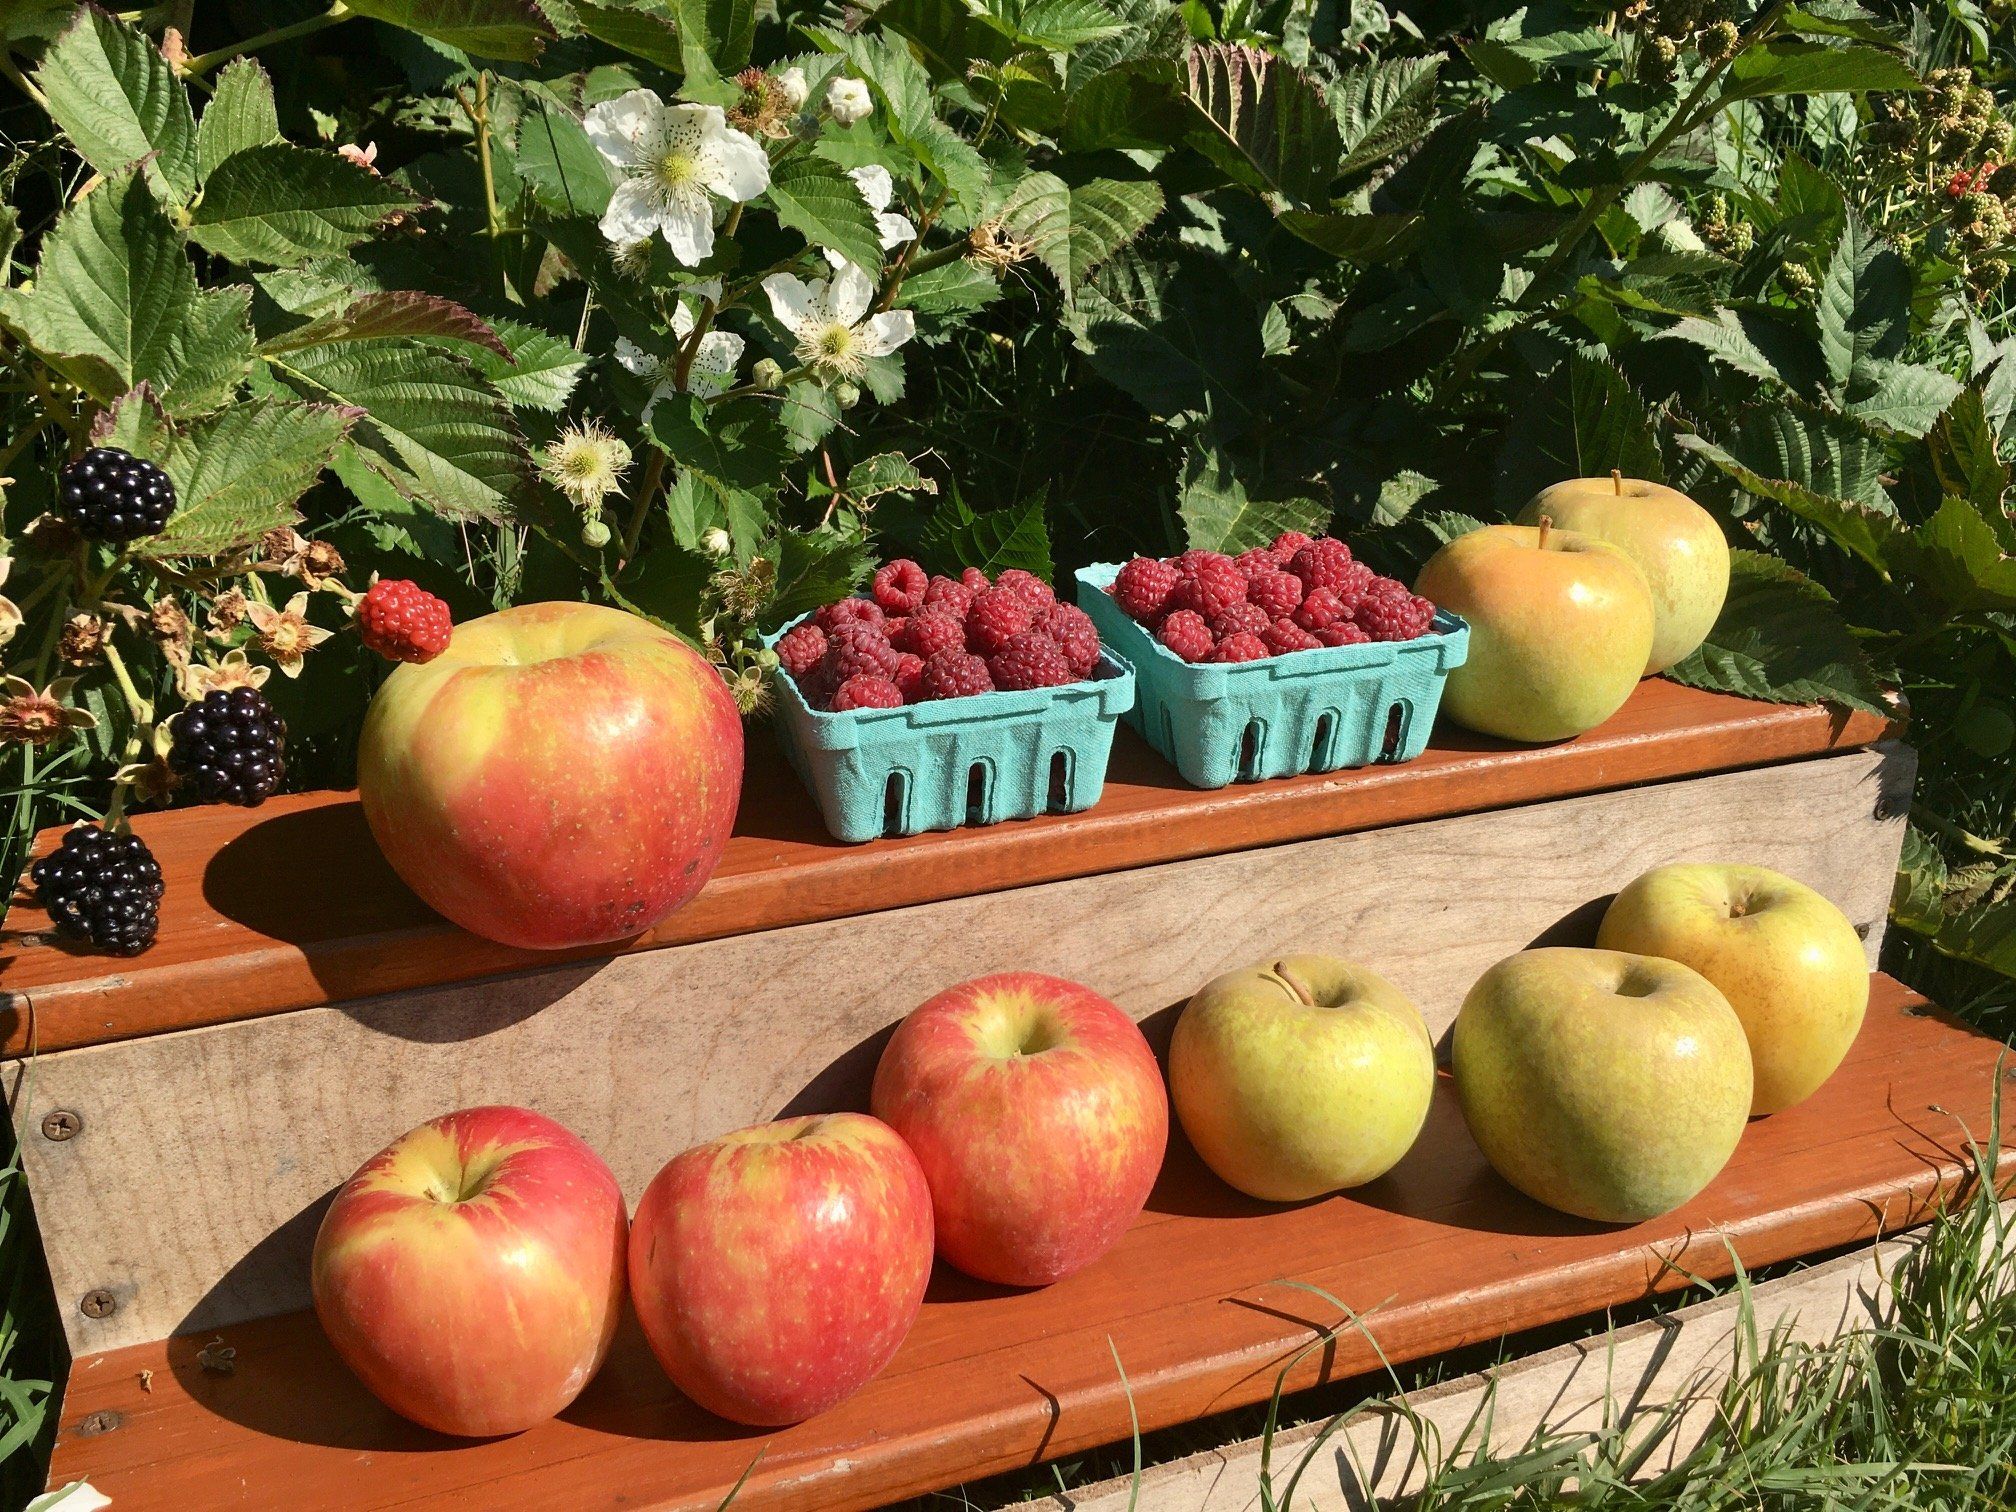 Cool weather, autumn fruits, and starting to think about our Winter CSA...